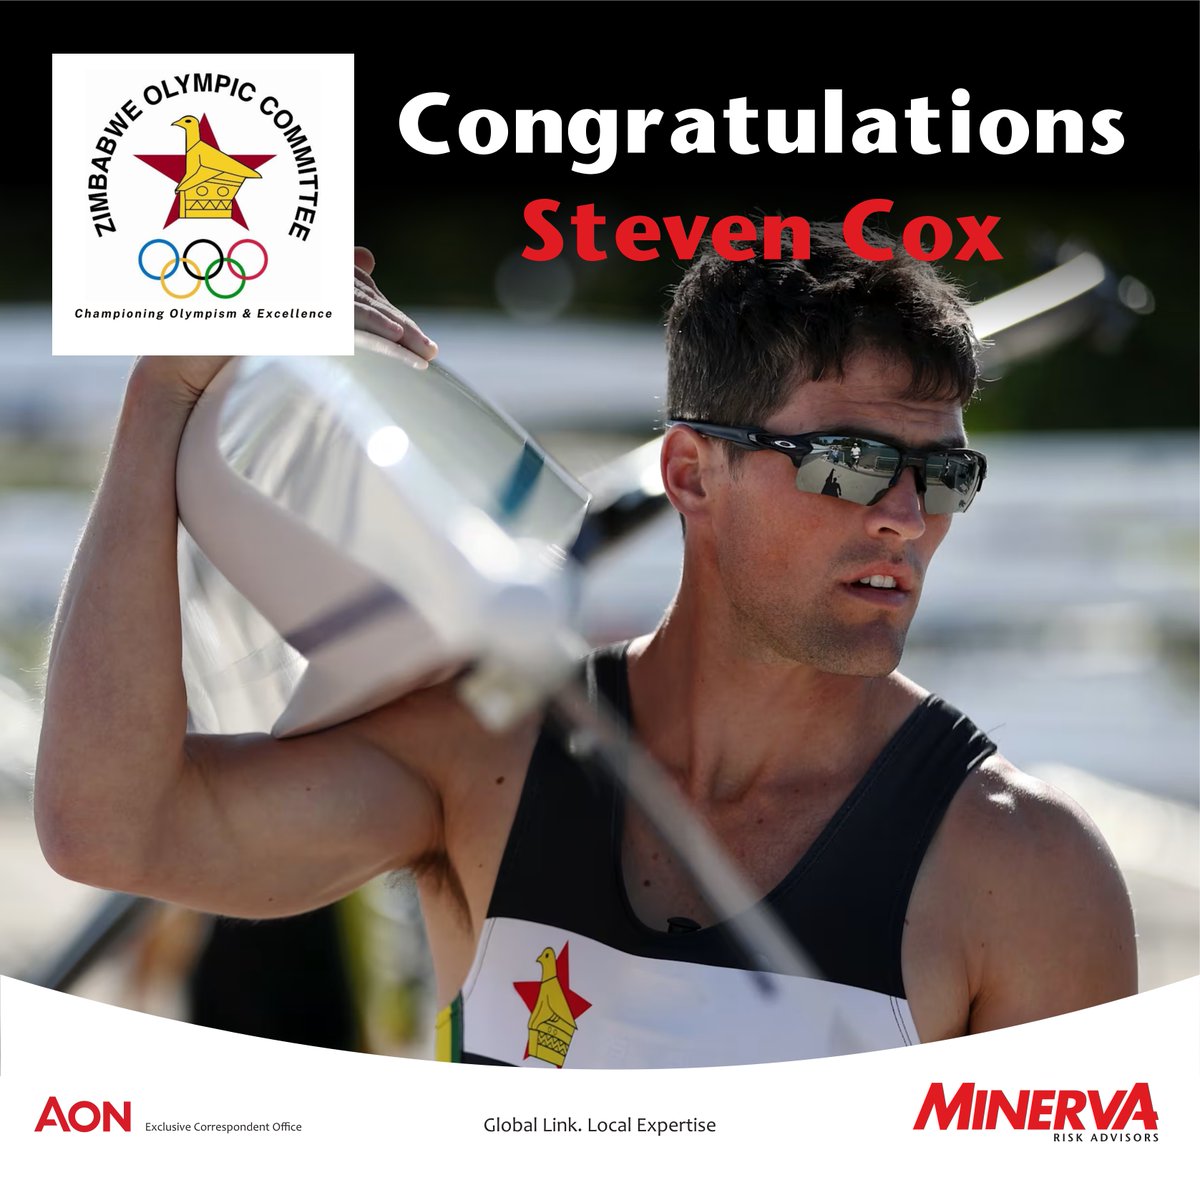 Congratulations to our Olympic qualifiers for Paris 2024!

Isaac Mpofu for the marathon and Steven Cox for rowing. We wish you the best of luck!

Minerva is the proud travel insurance partner for the Zimbabwean Olympic Team.

#TeamZimbabwe
#Paris2024
#Olympics2024
#Zimsport…